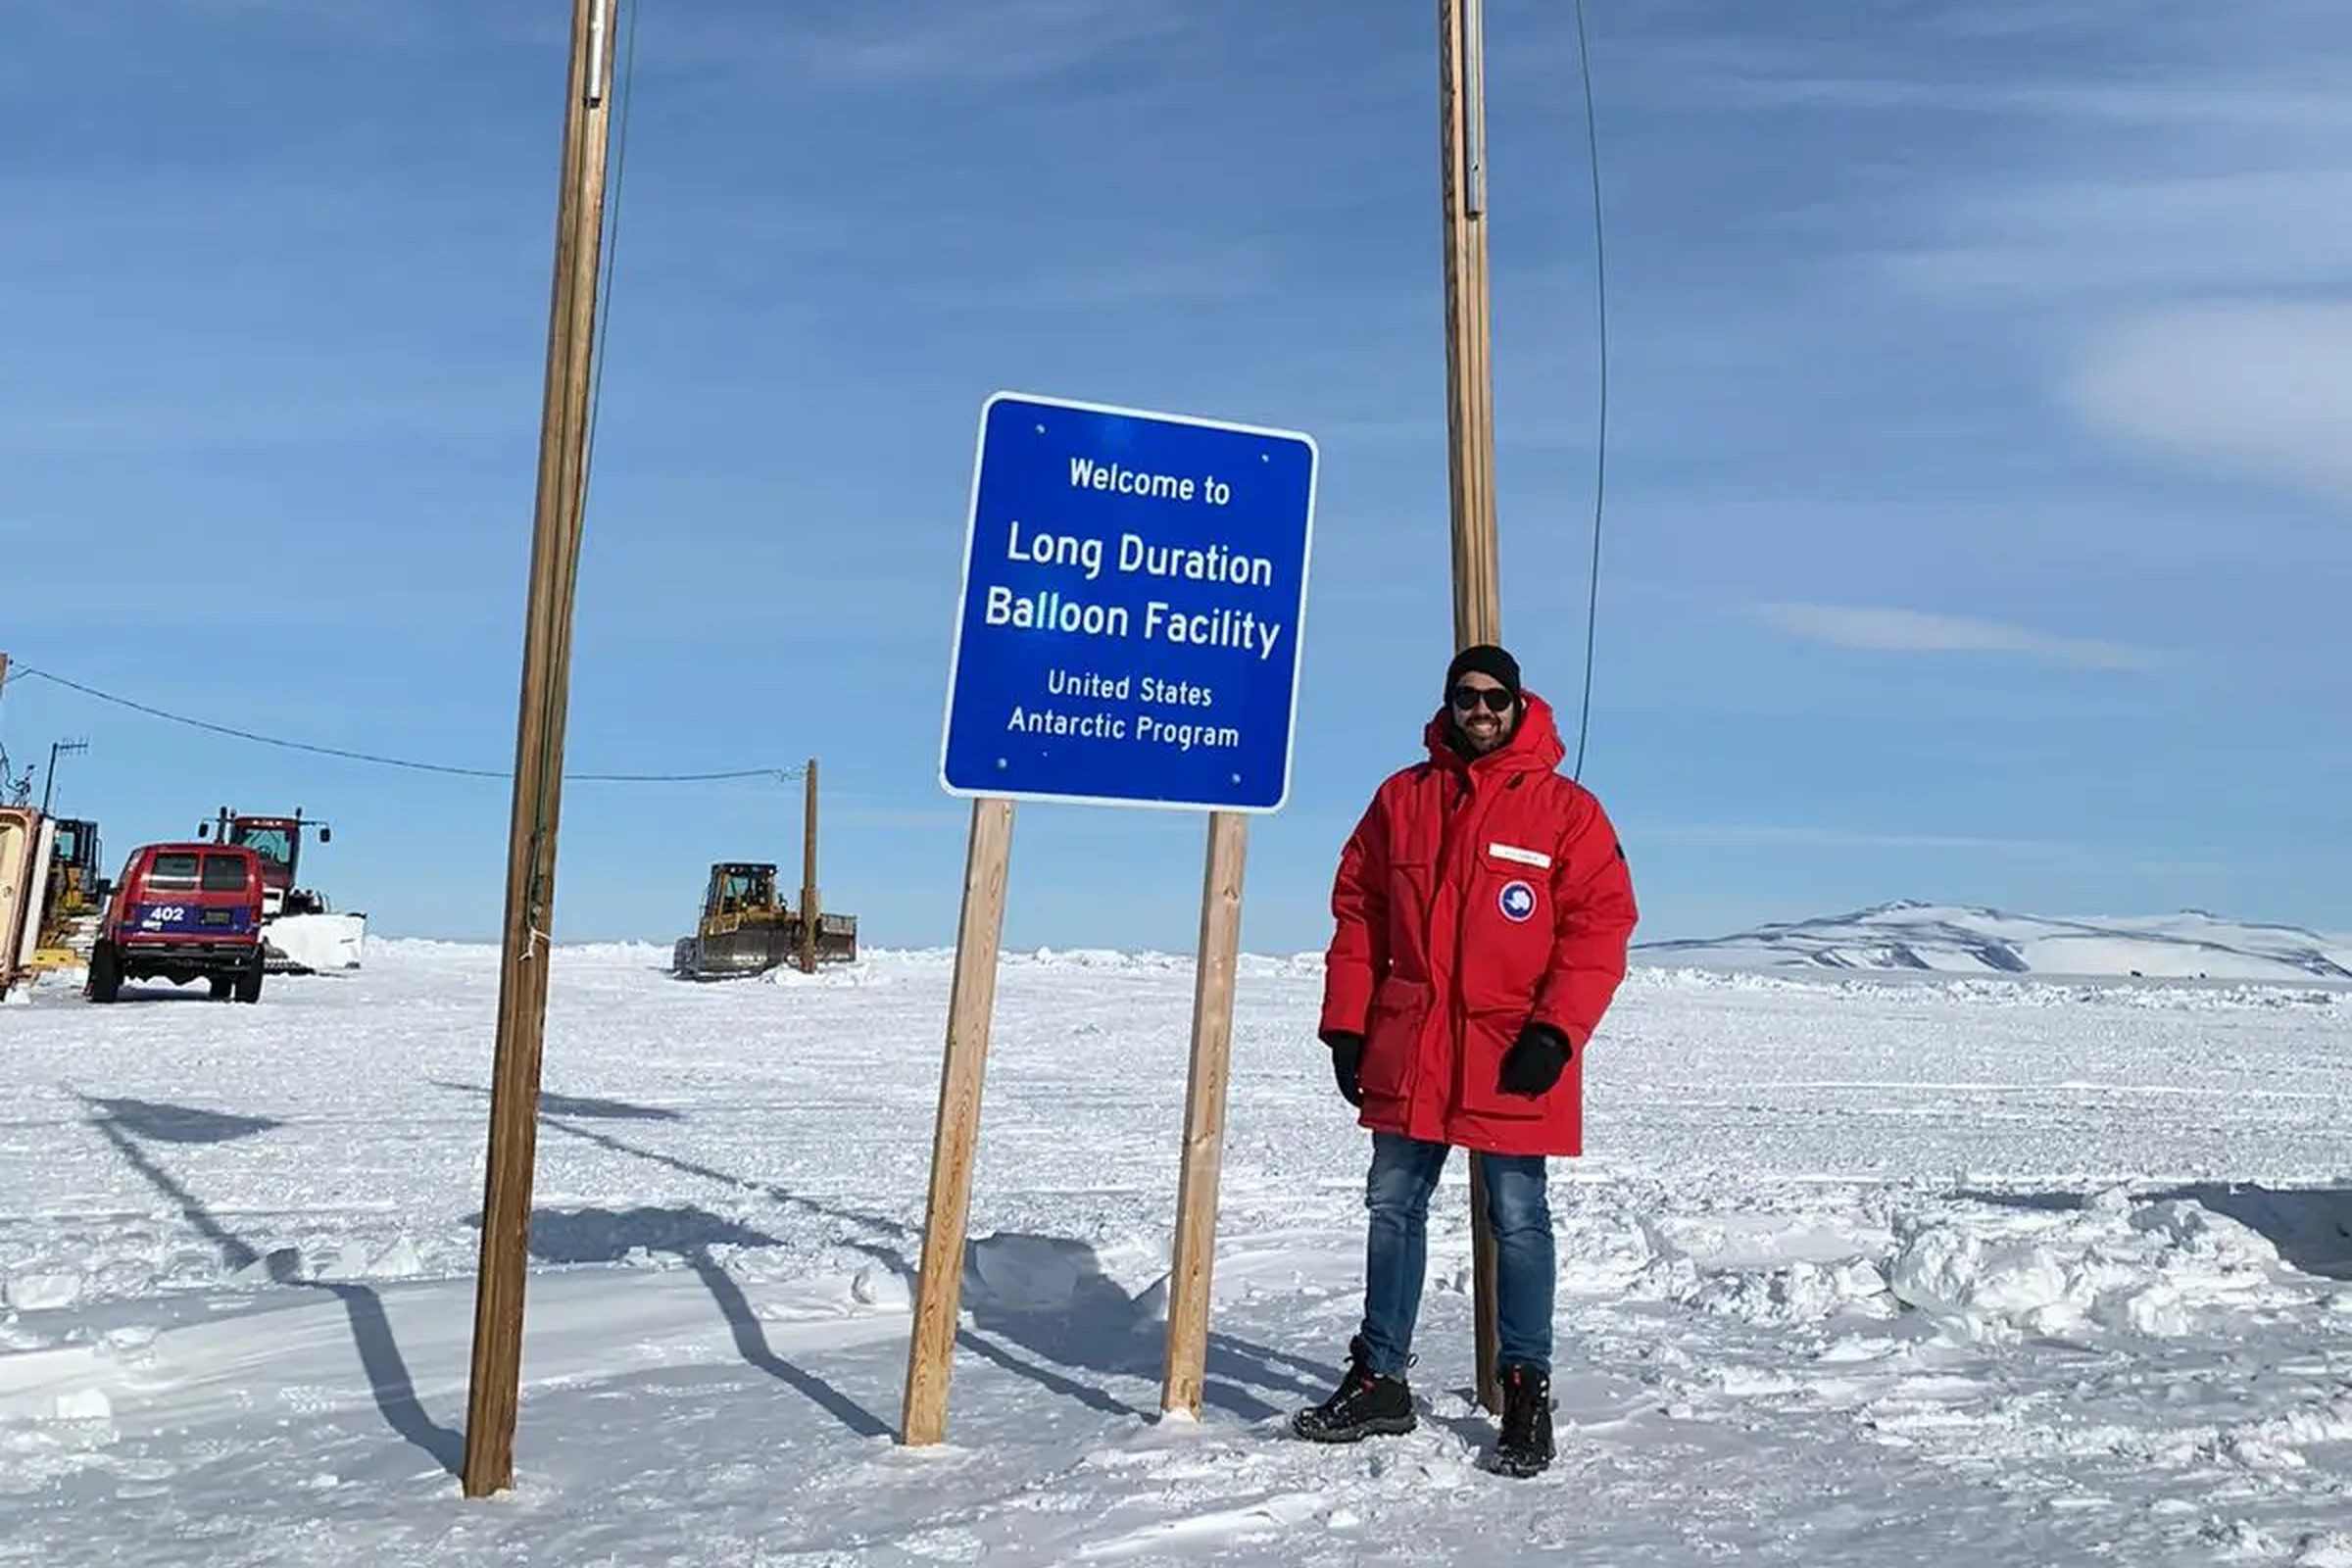 A picture of a person standing on snow next to a sign reading “Welcome to Long Duration Balloon Facility.” Smaller letters beneath say “United States Antarctic Program.”